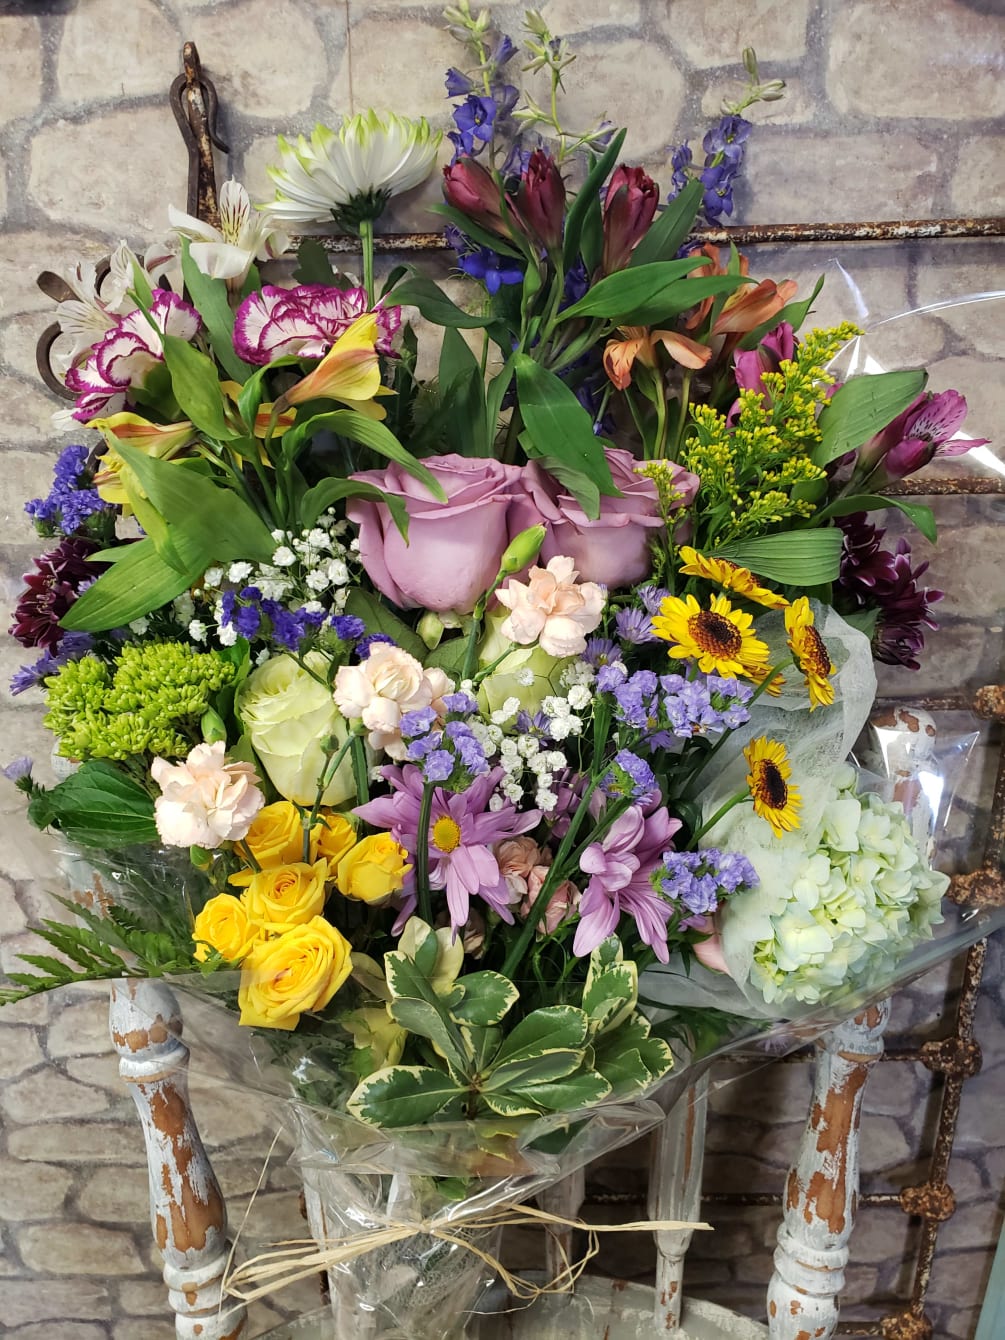 SOLD OUT!
NO VASE OR CONTAINER with this bouquet choice!
A variety of market